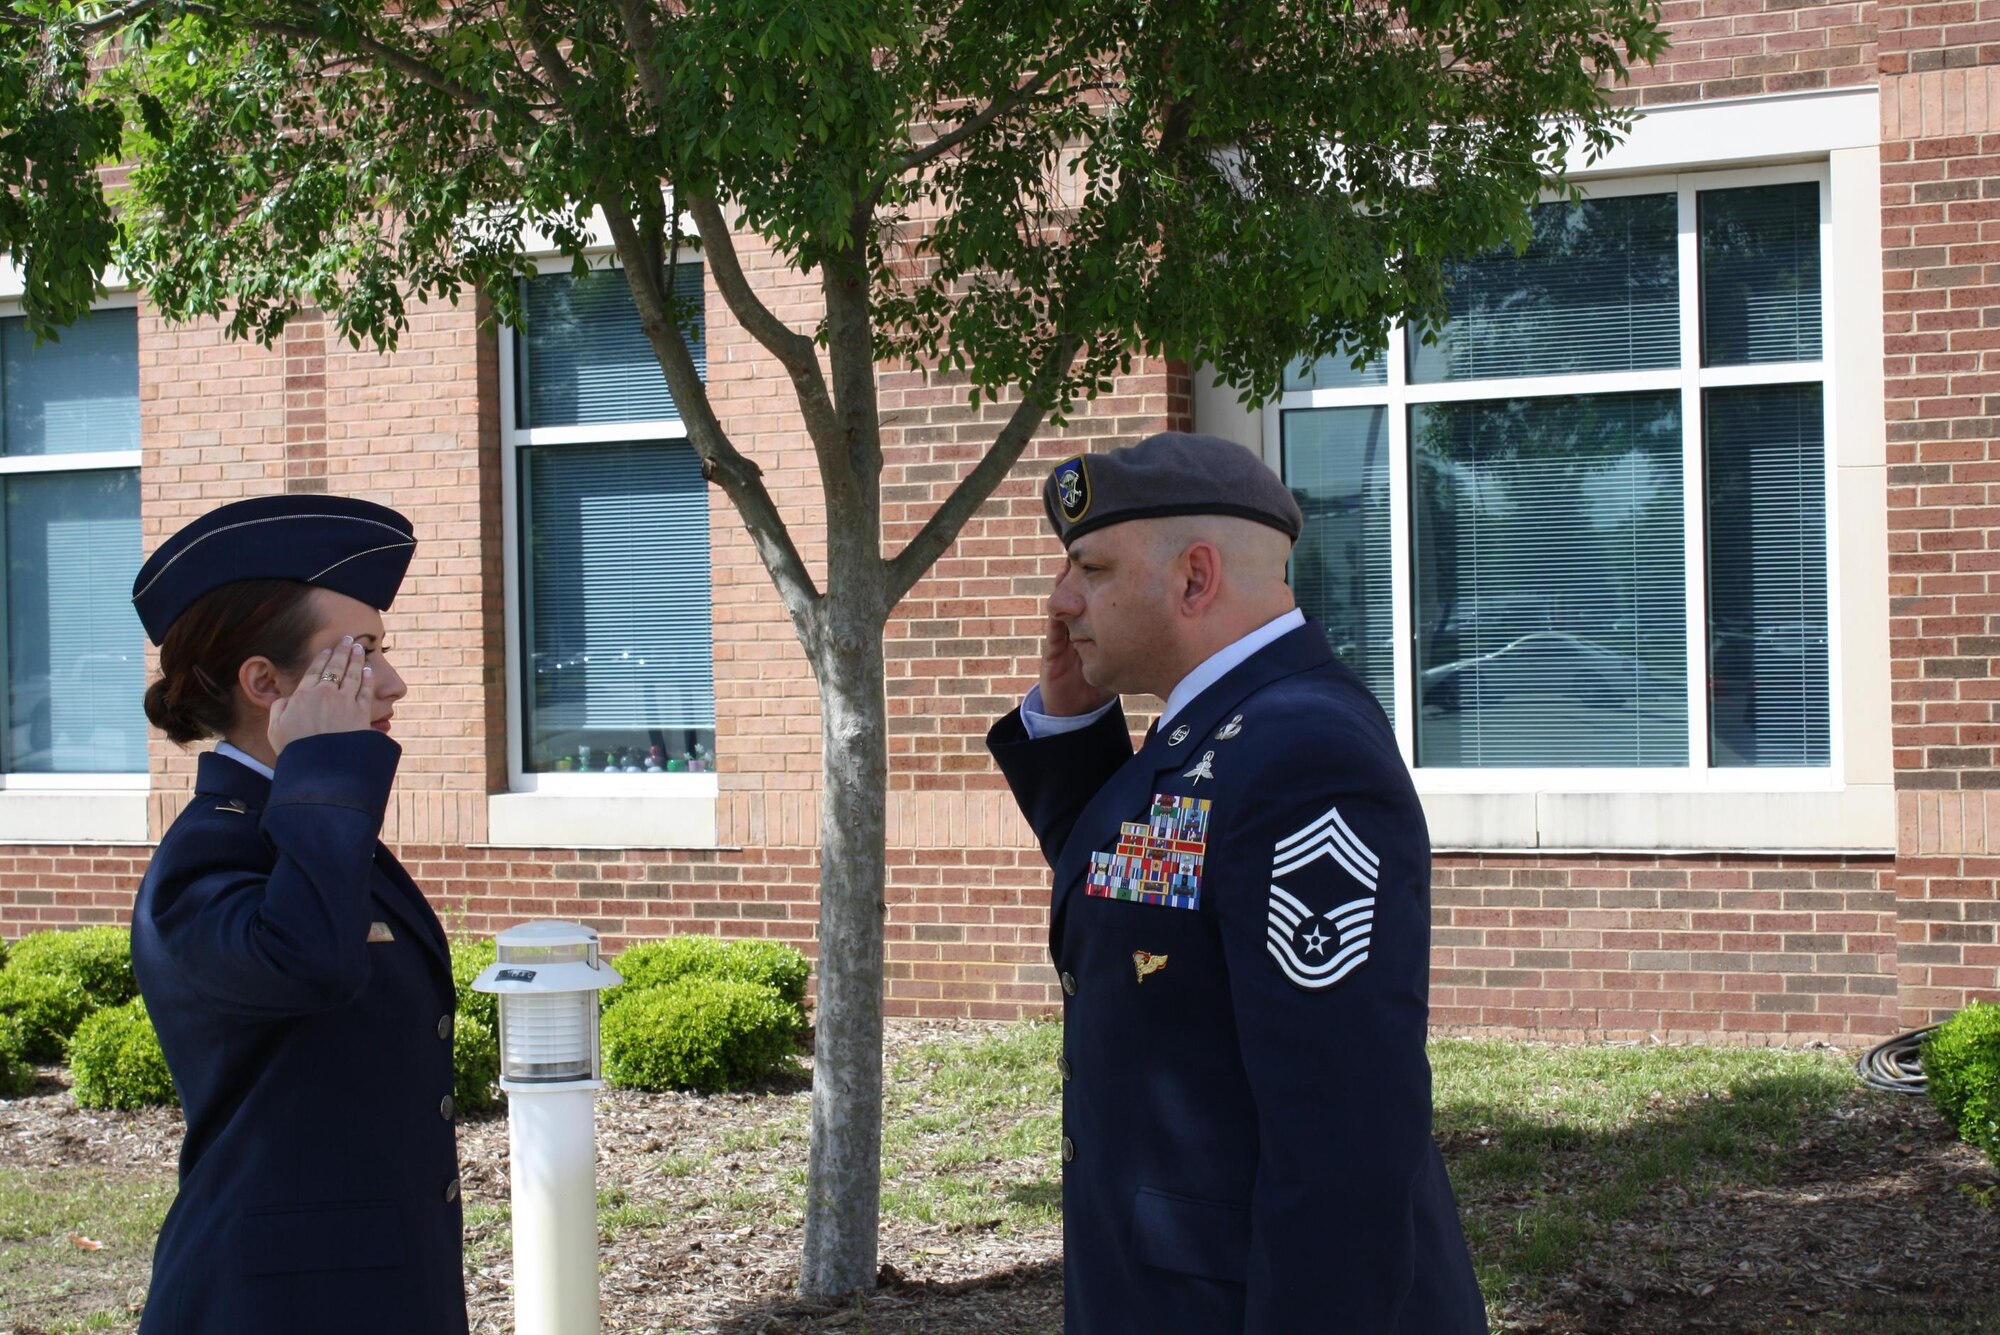 Chief Master Sgt. Jason Colon, 91st Operations Group superintendent, salutes his daughter 2nd Lt. Jenna Colon after her commissioning ceremony at East Carolina University, May 9, 2015. 2nd Lt. Colon is continuing a family tradition of military service that stretches back to the Korean War. (Courtesy photo)